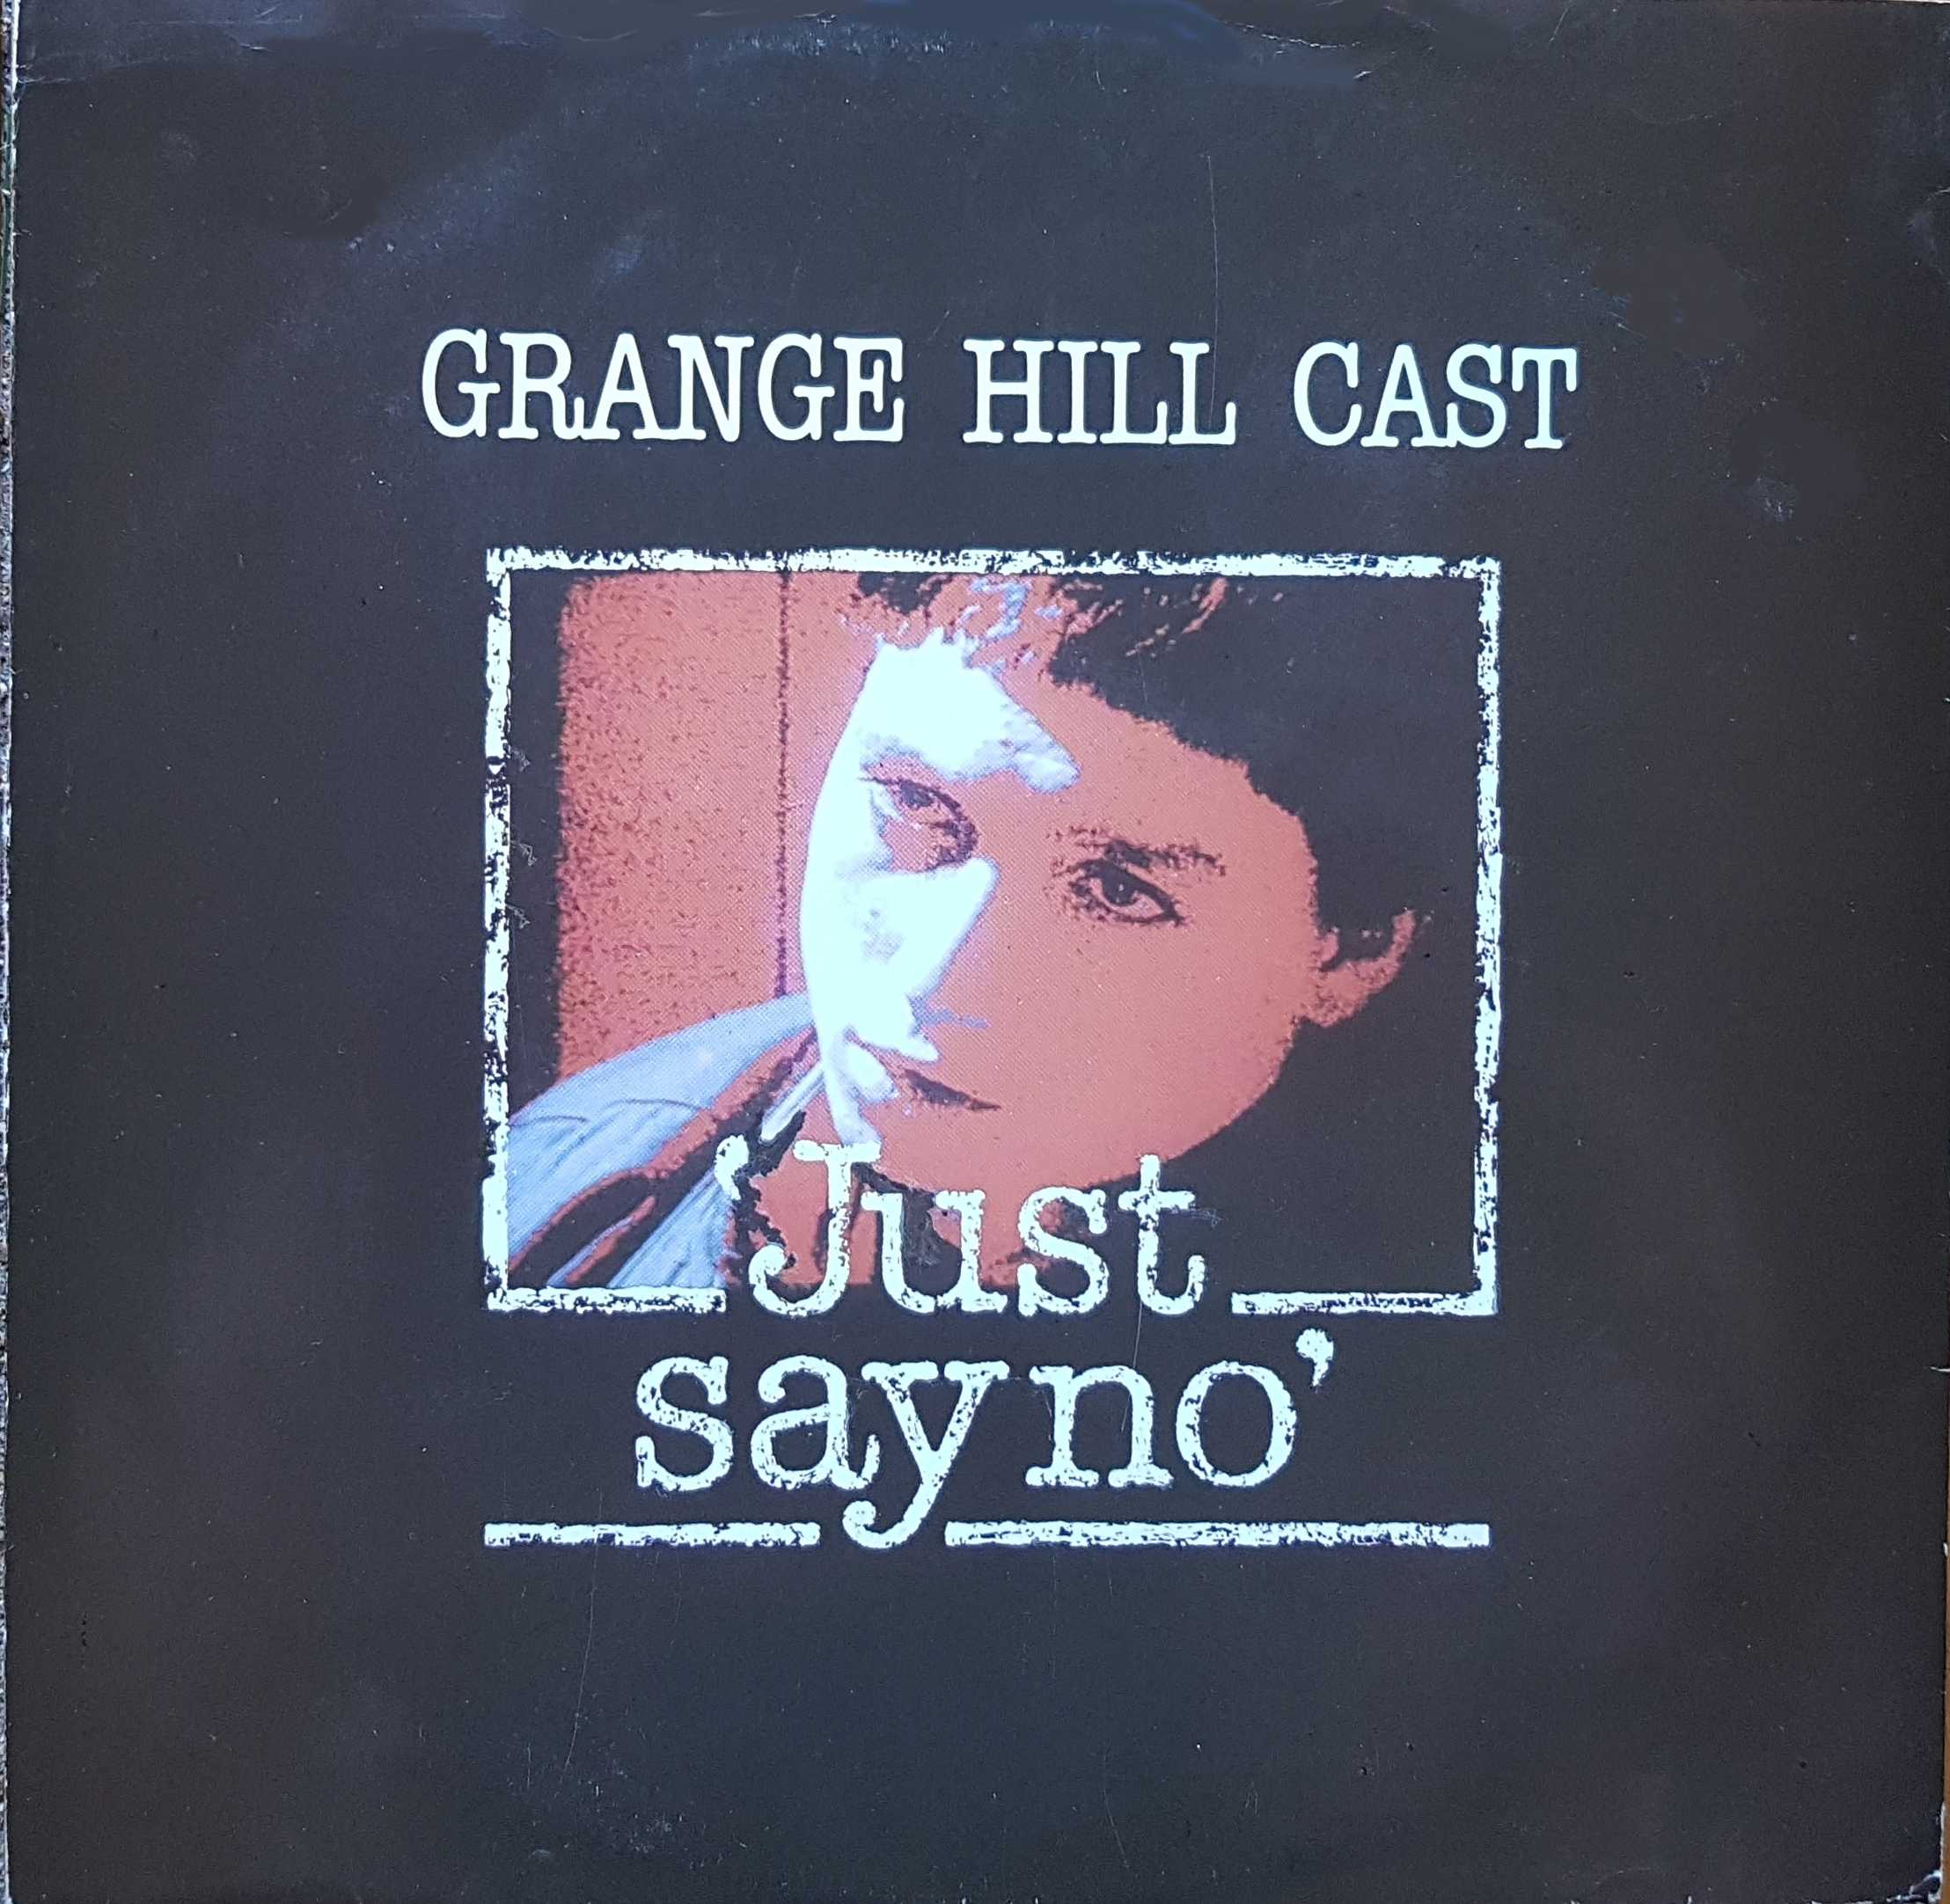 Picture of 12 RSL 183 Just say no (Grange Hill) by artist Grogani / McMahon from the BBC 12inches - Records and Tapes library